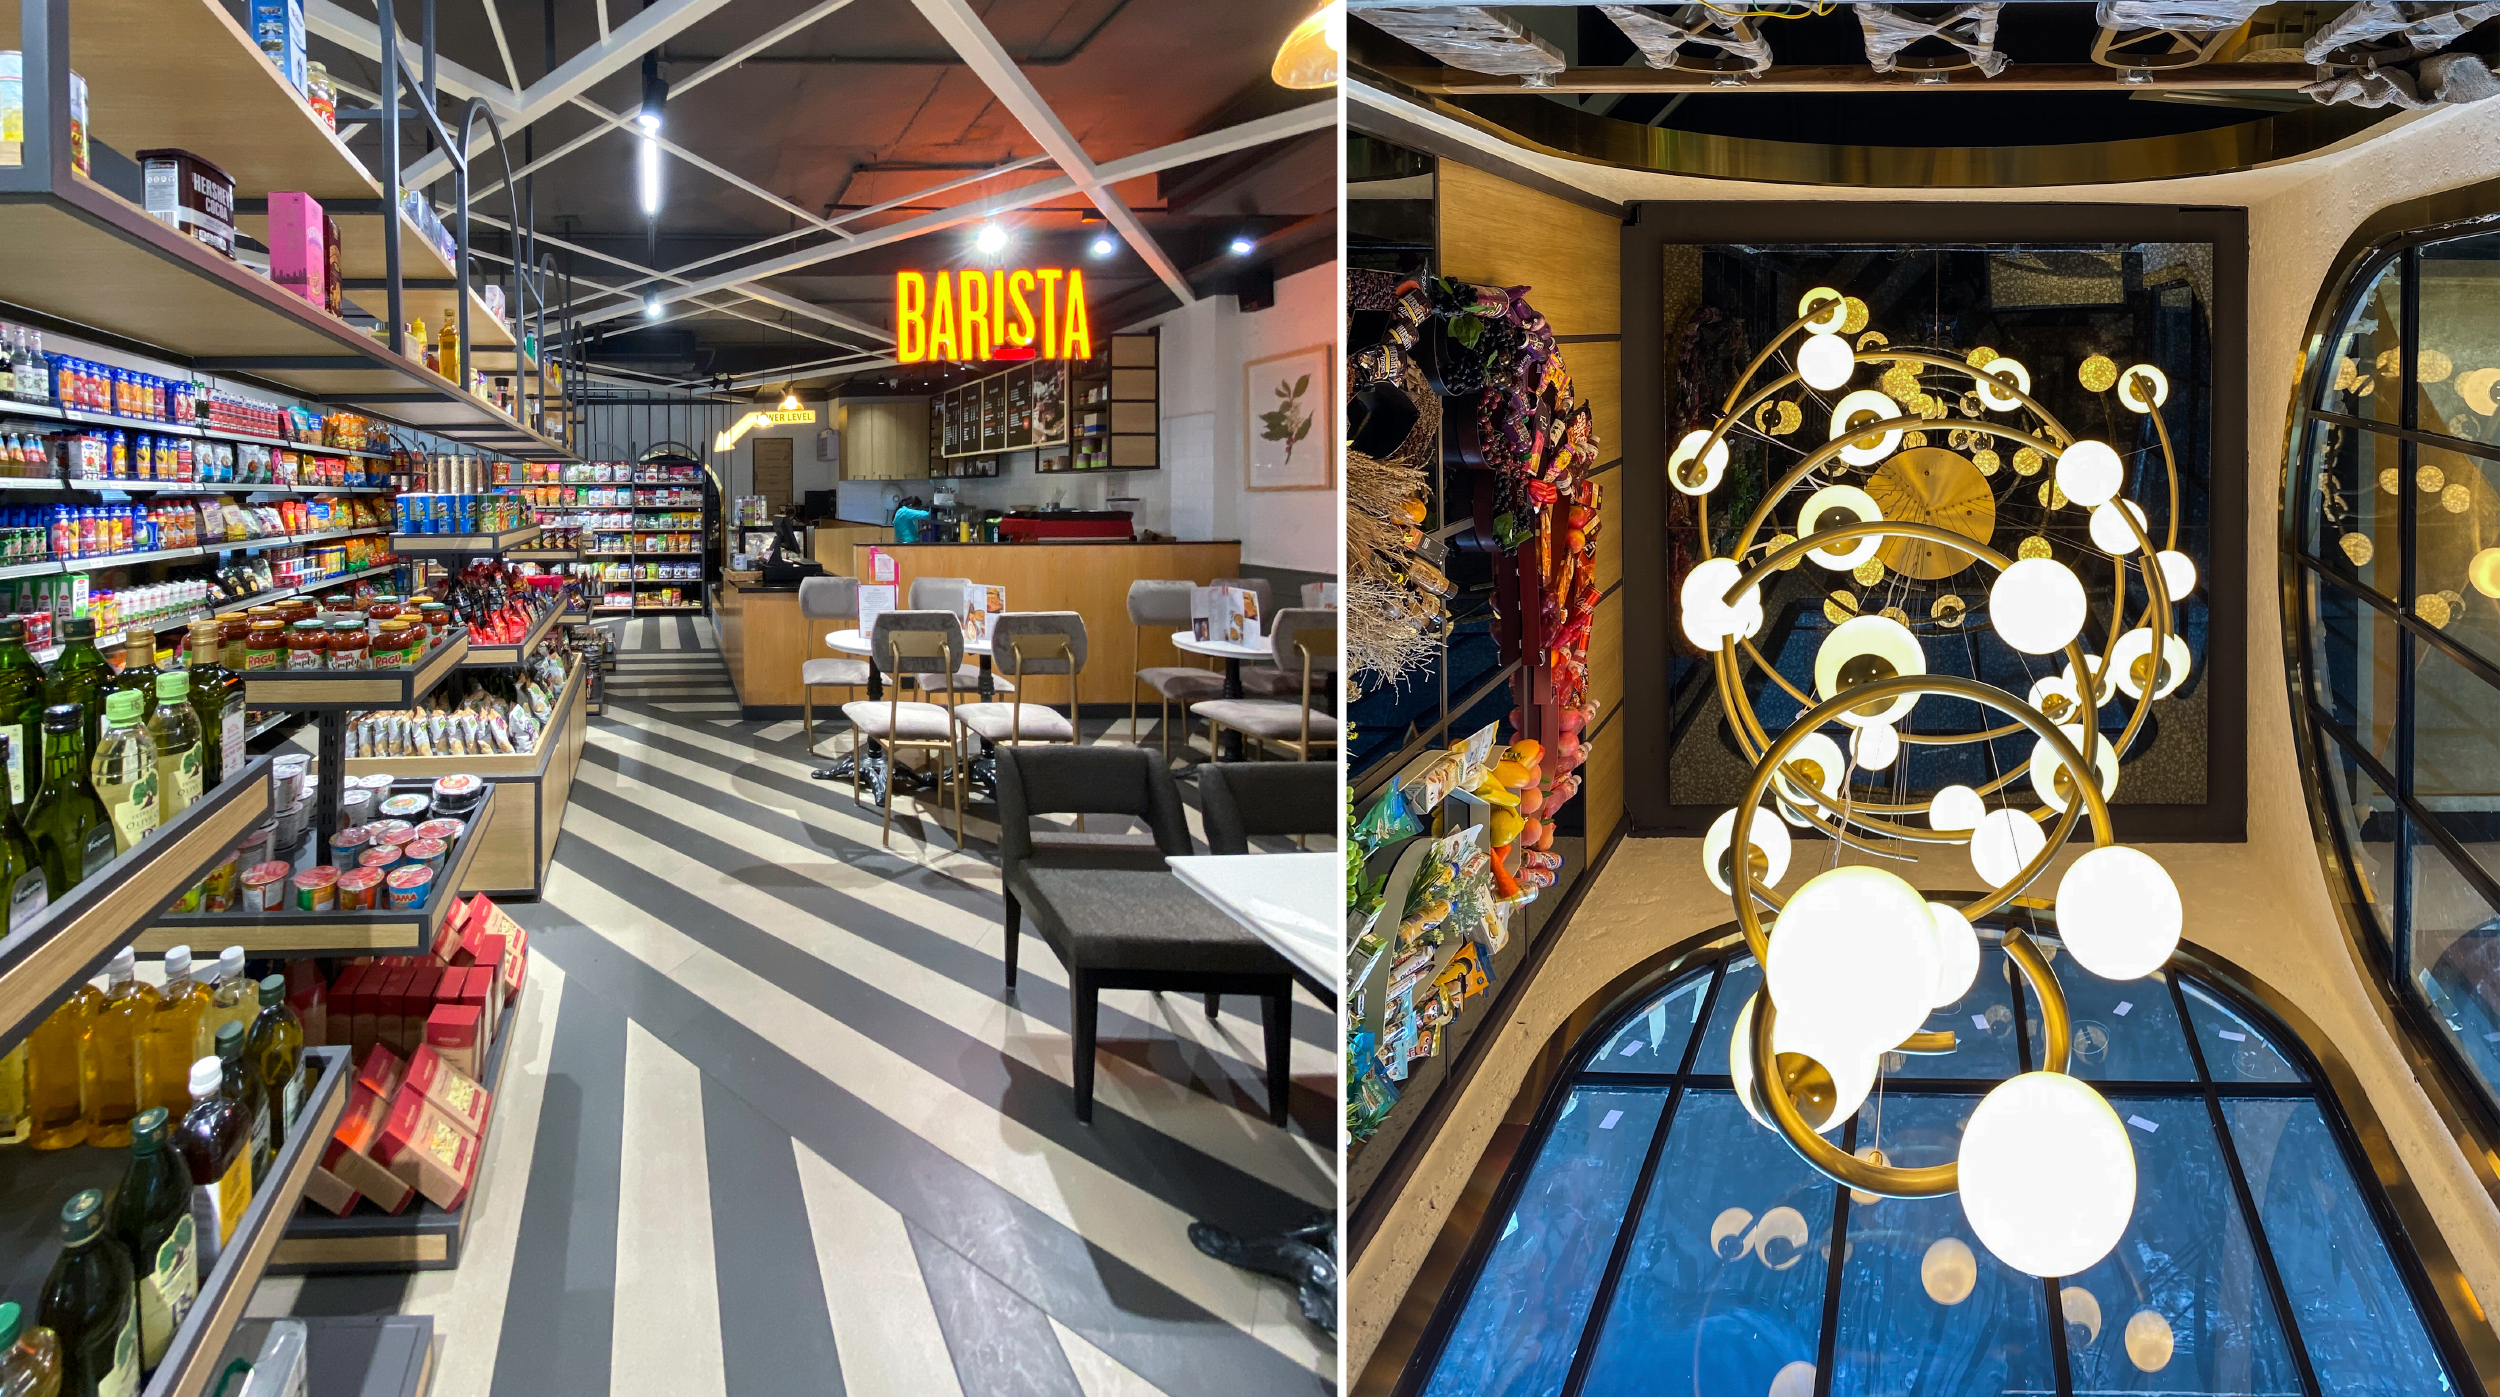 The first luxury gourmet grocery store in India’s city of Ludhiana, SuperMarche’s eclectic interior uses a plethora of dynamic patterns and bold materials.